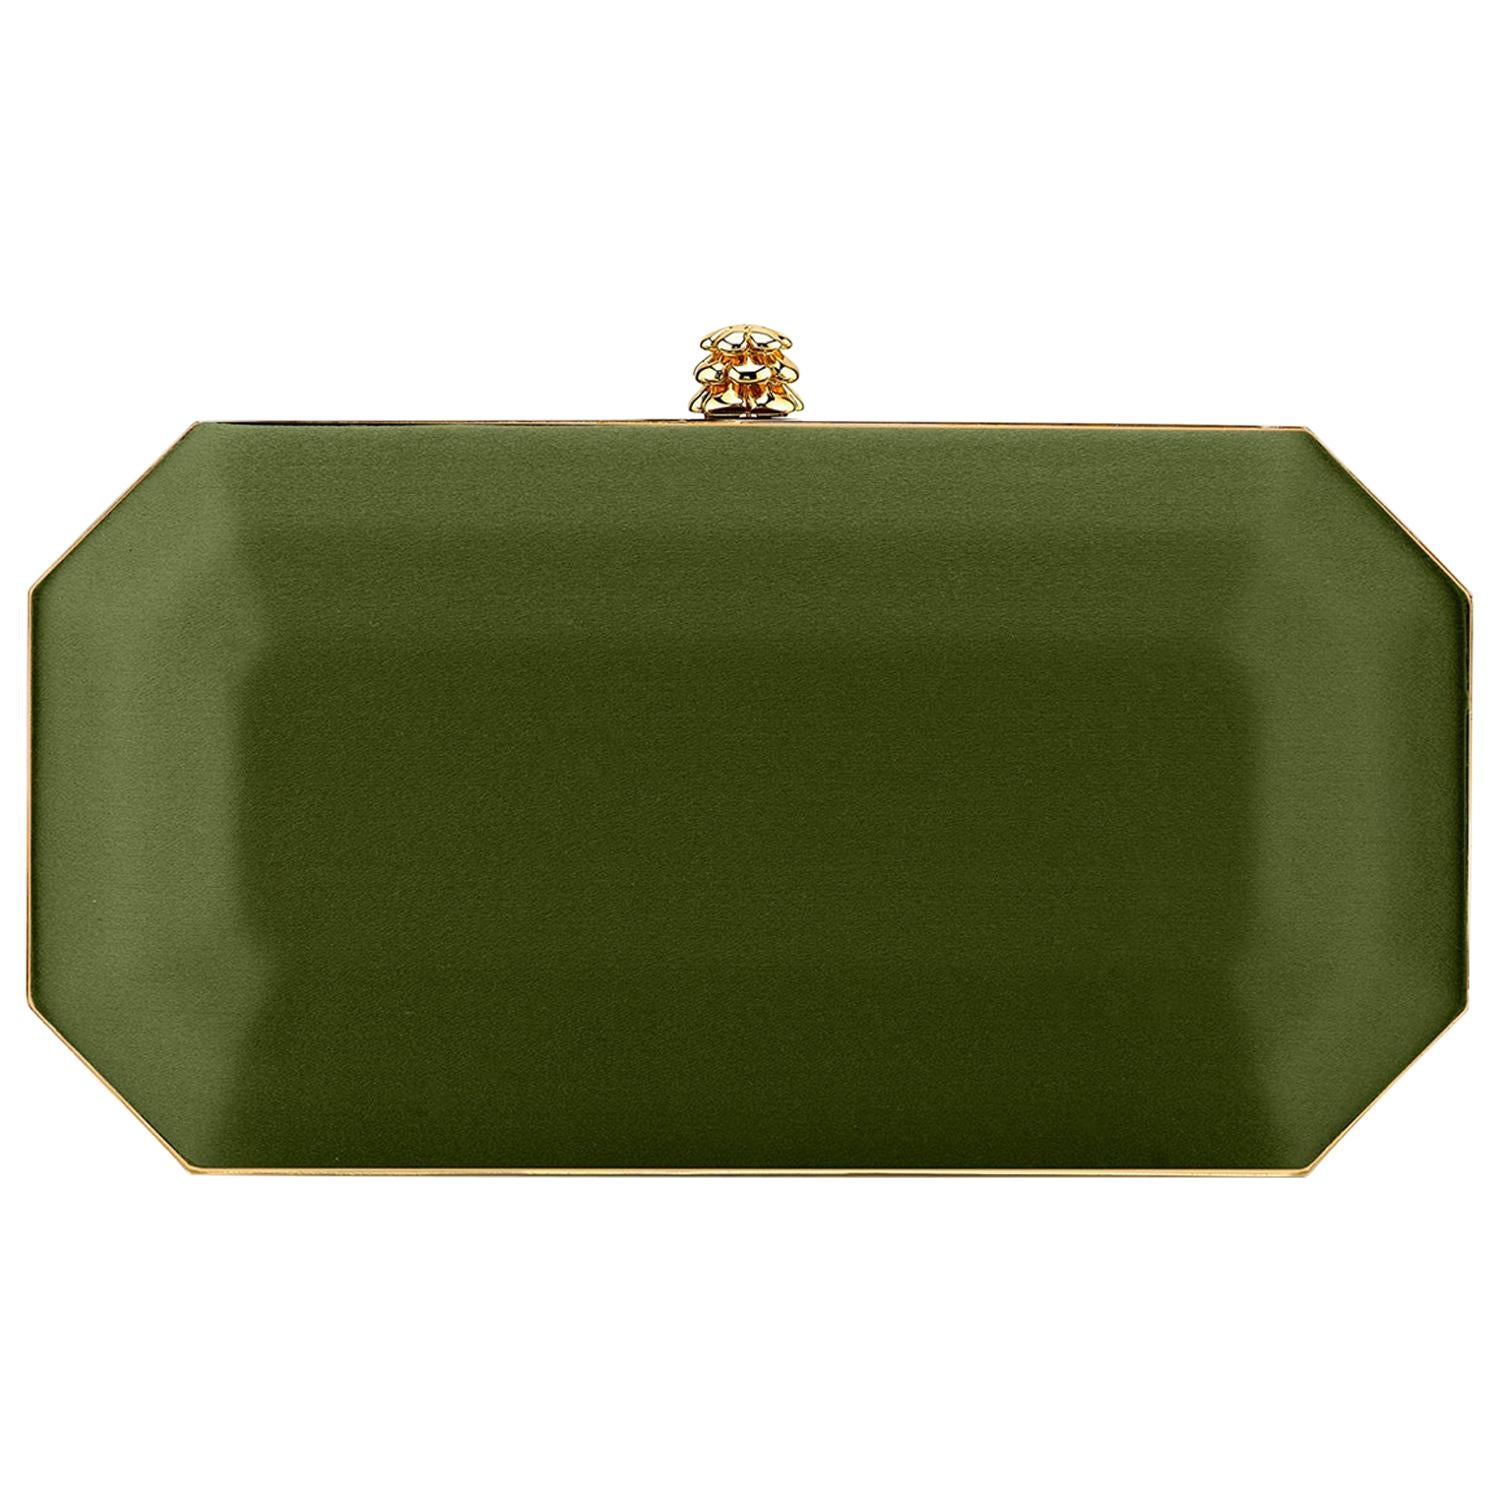 TYLER ELLIS Perry Small Clutch Army Green Satin Gold Hardware